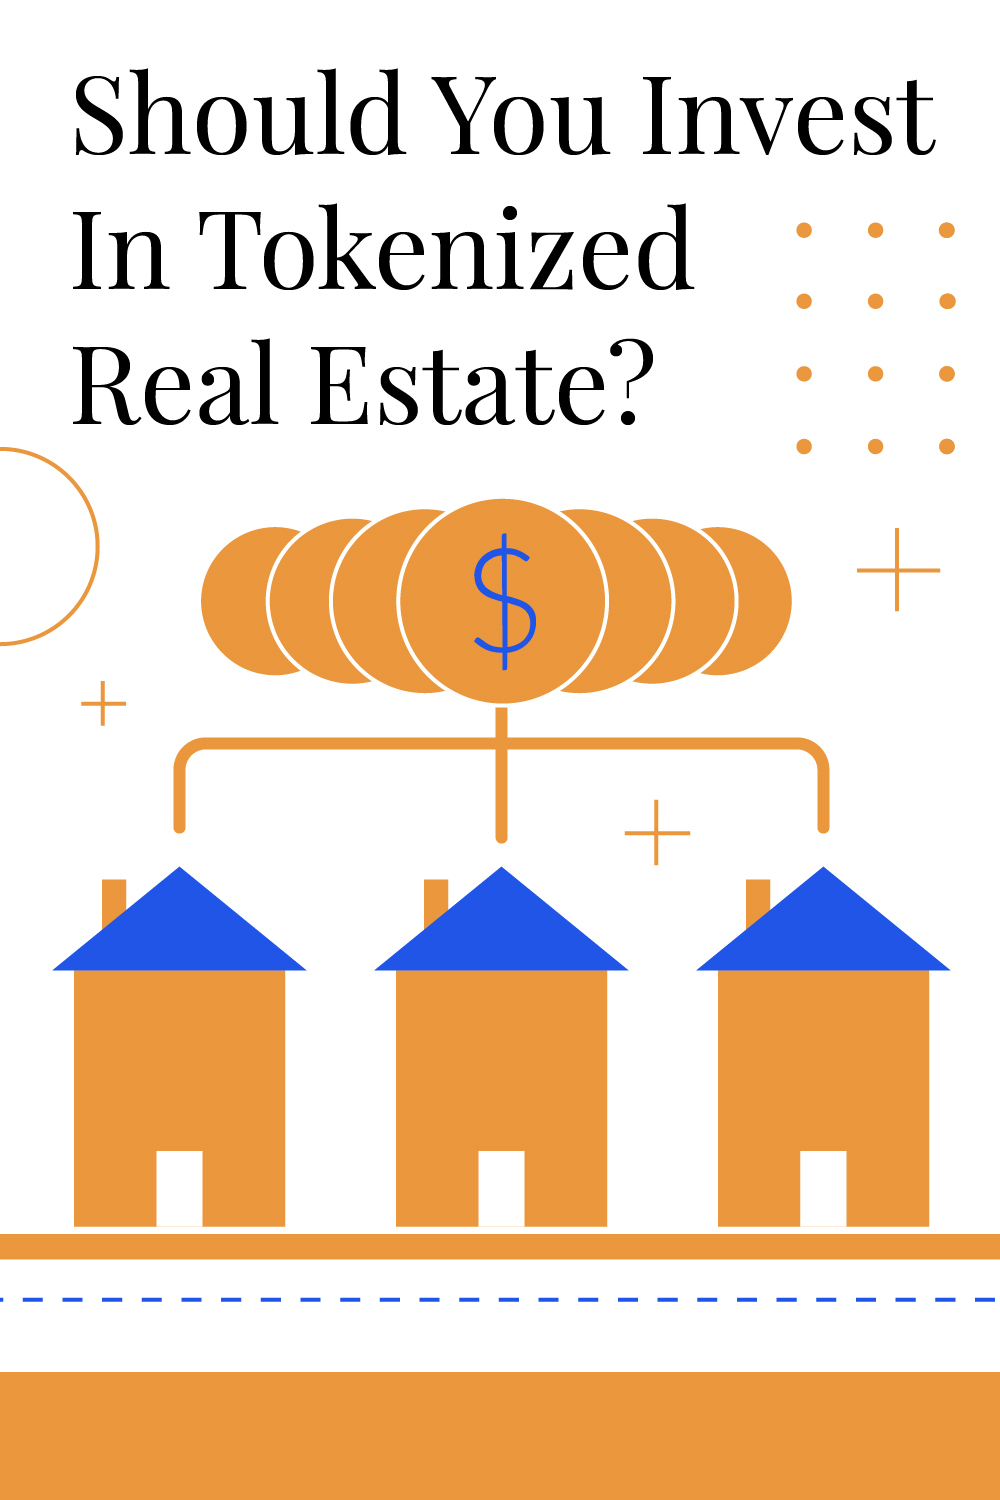 Should You Invest In Tokenized Real Estate?